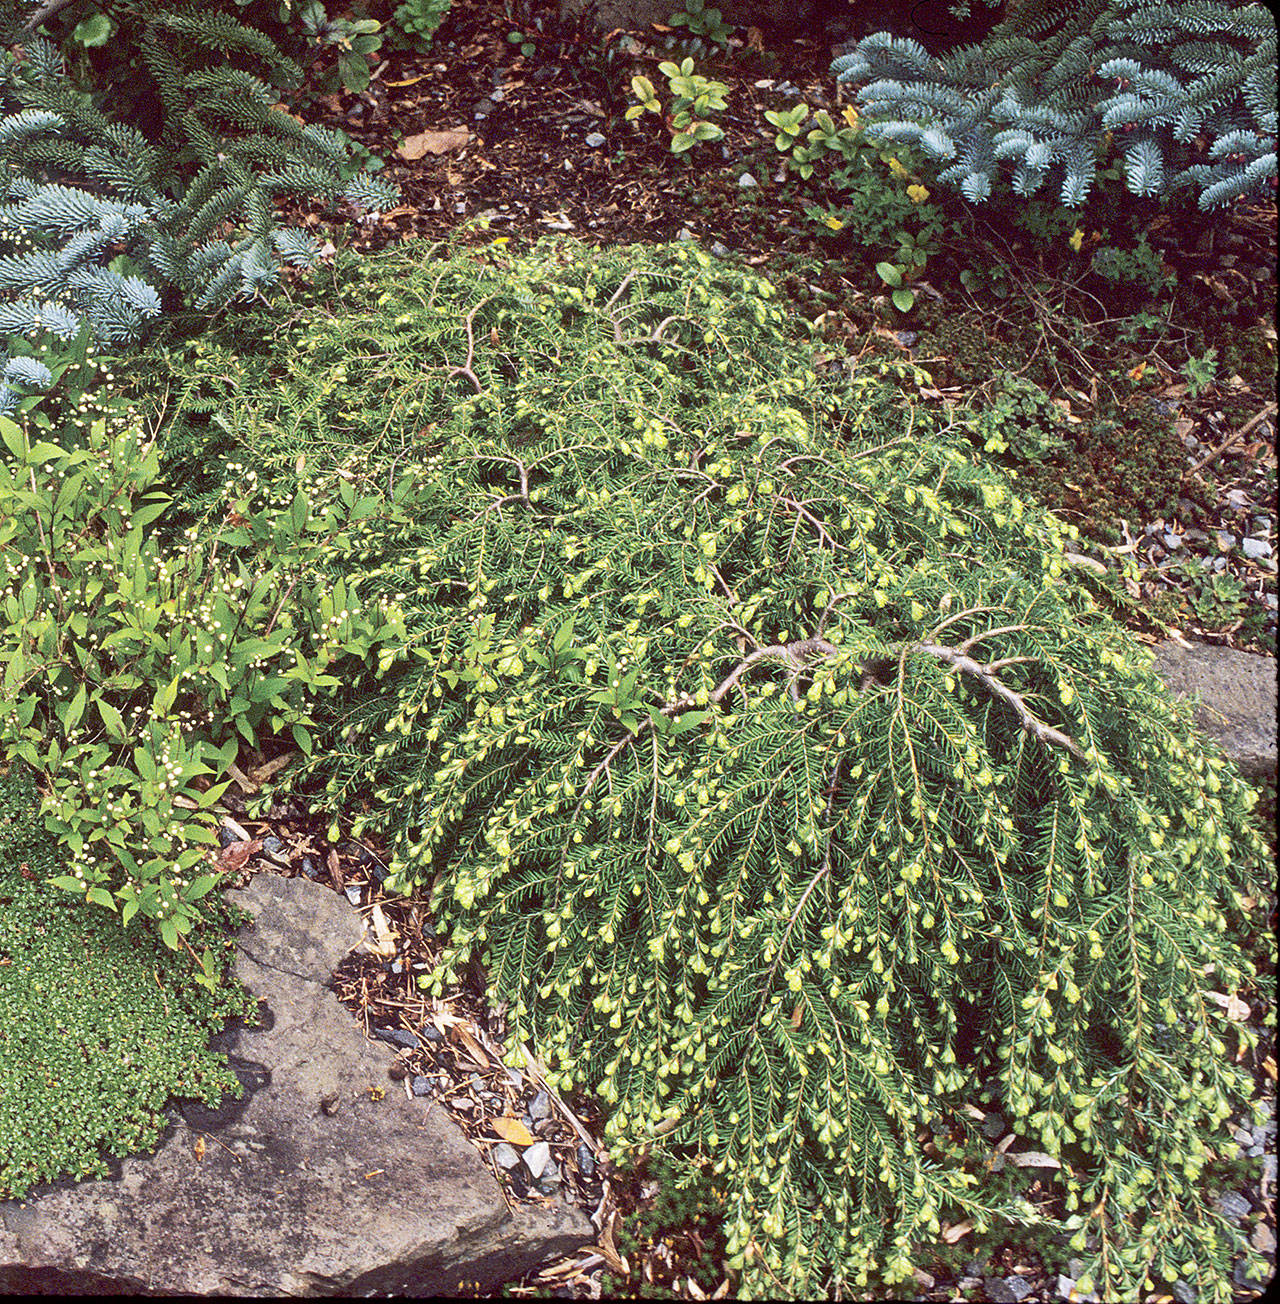 Prostrate Canadian hemlock is a year-round evergreen with bright green new growth in the spring. (Richie Steffen)